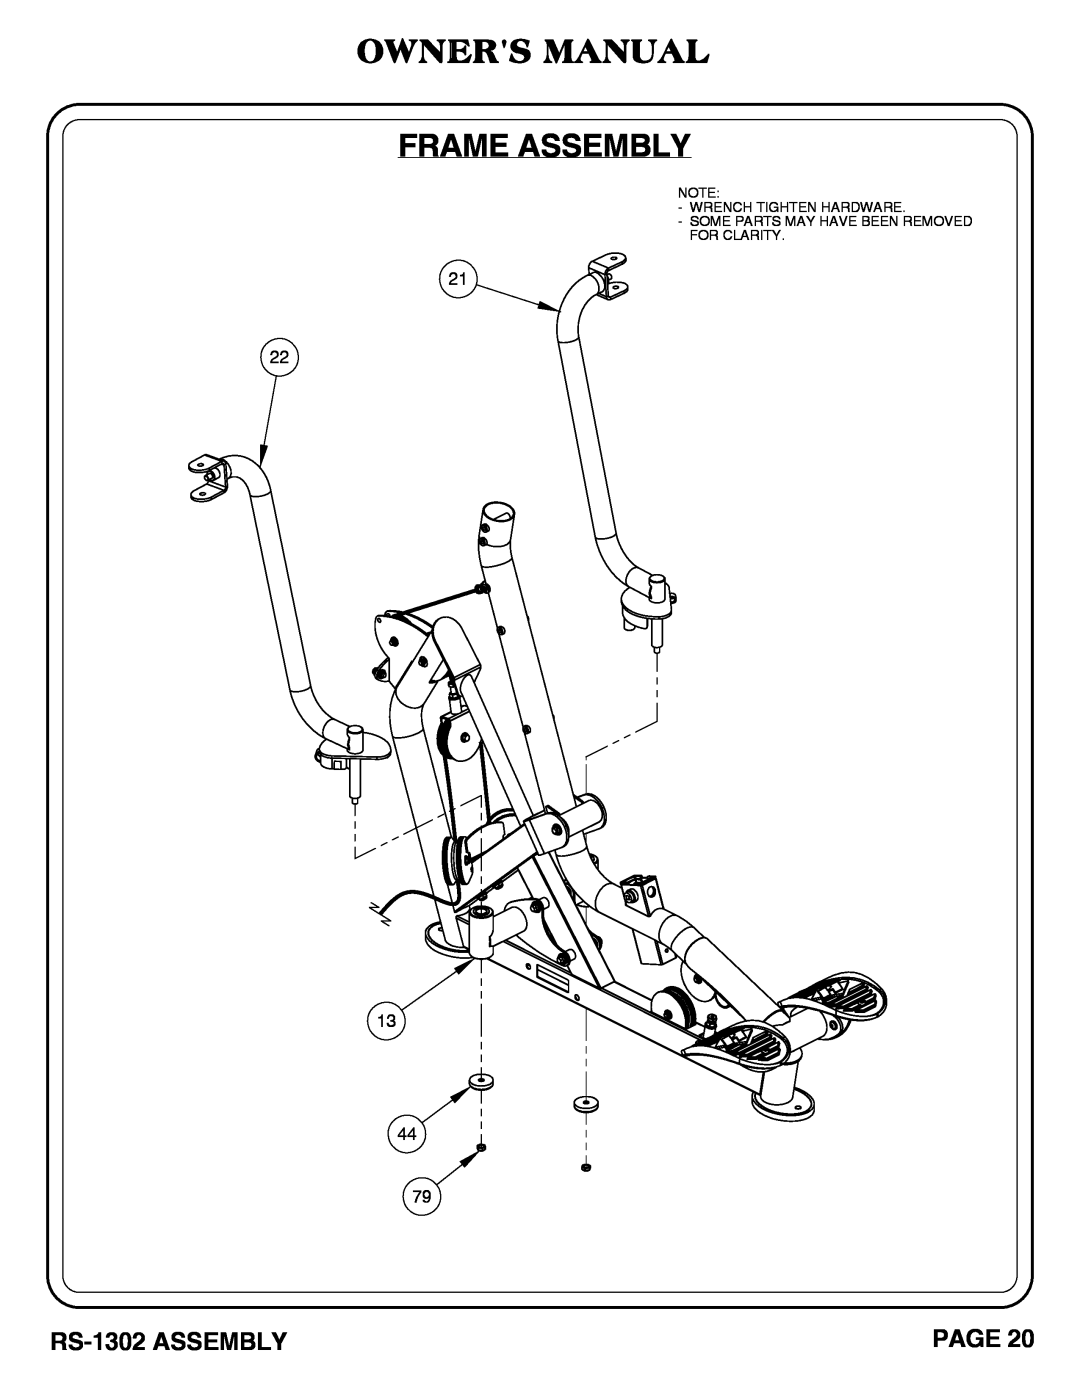 Hoist Fitness owner manual Owners Manual Frame Assembly, RS-1302 ASSEMBLY, Page 